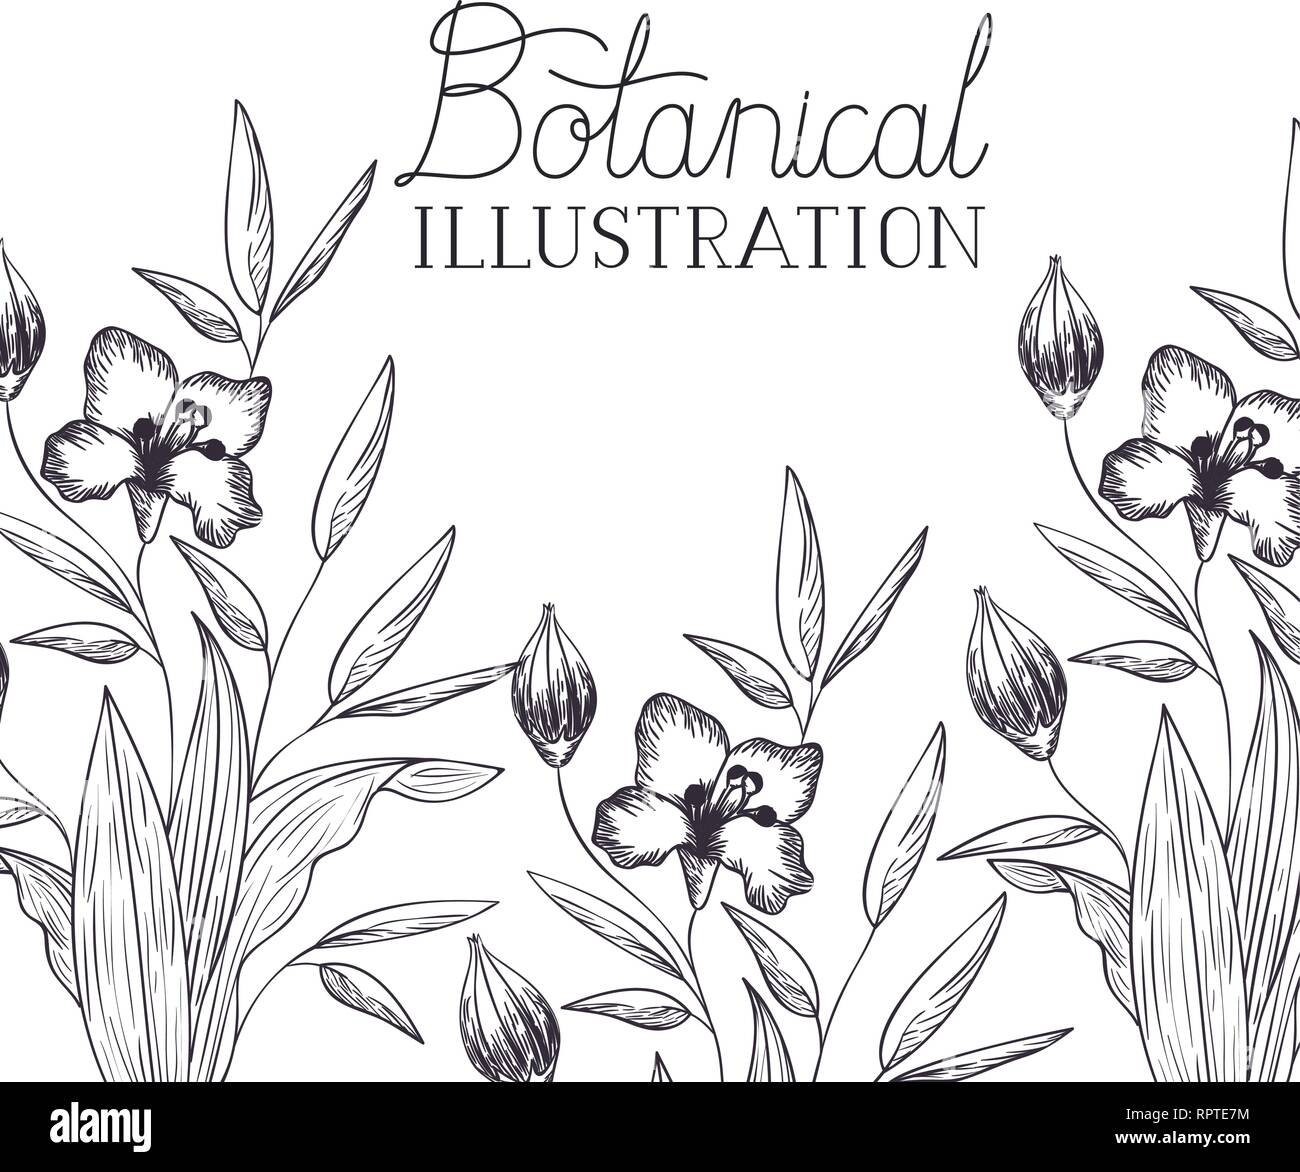 botanical illustration label with plants Stock Vector